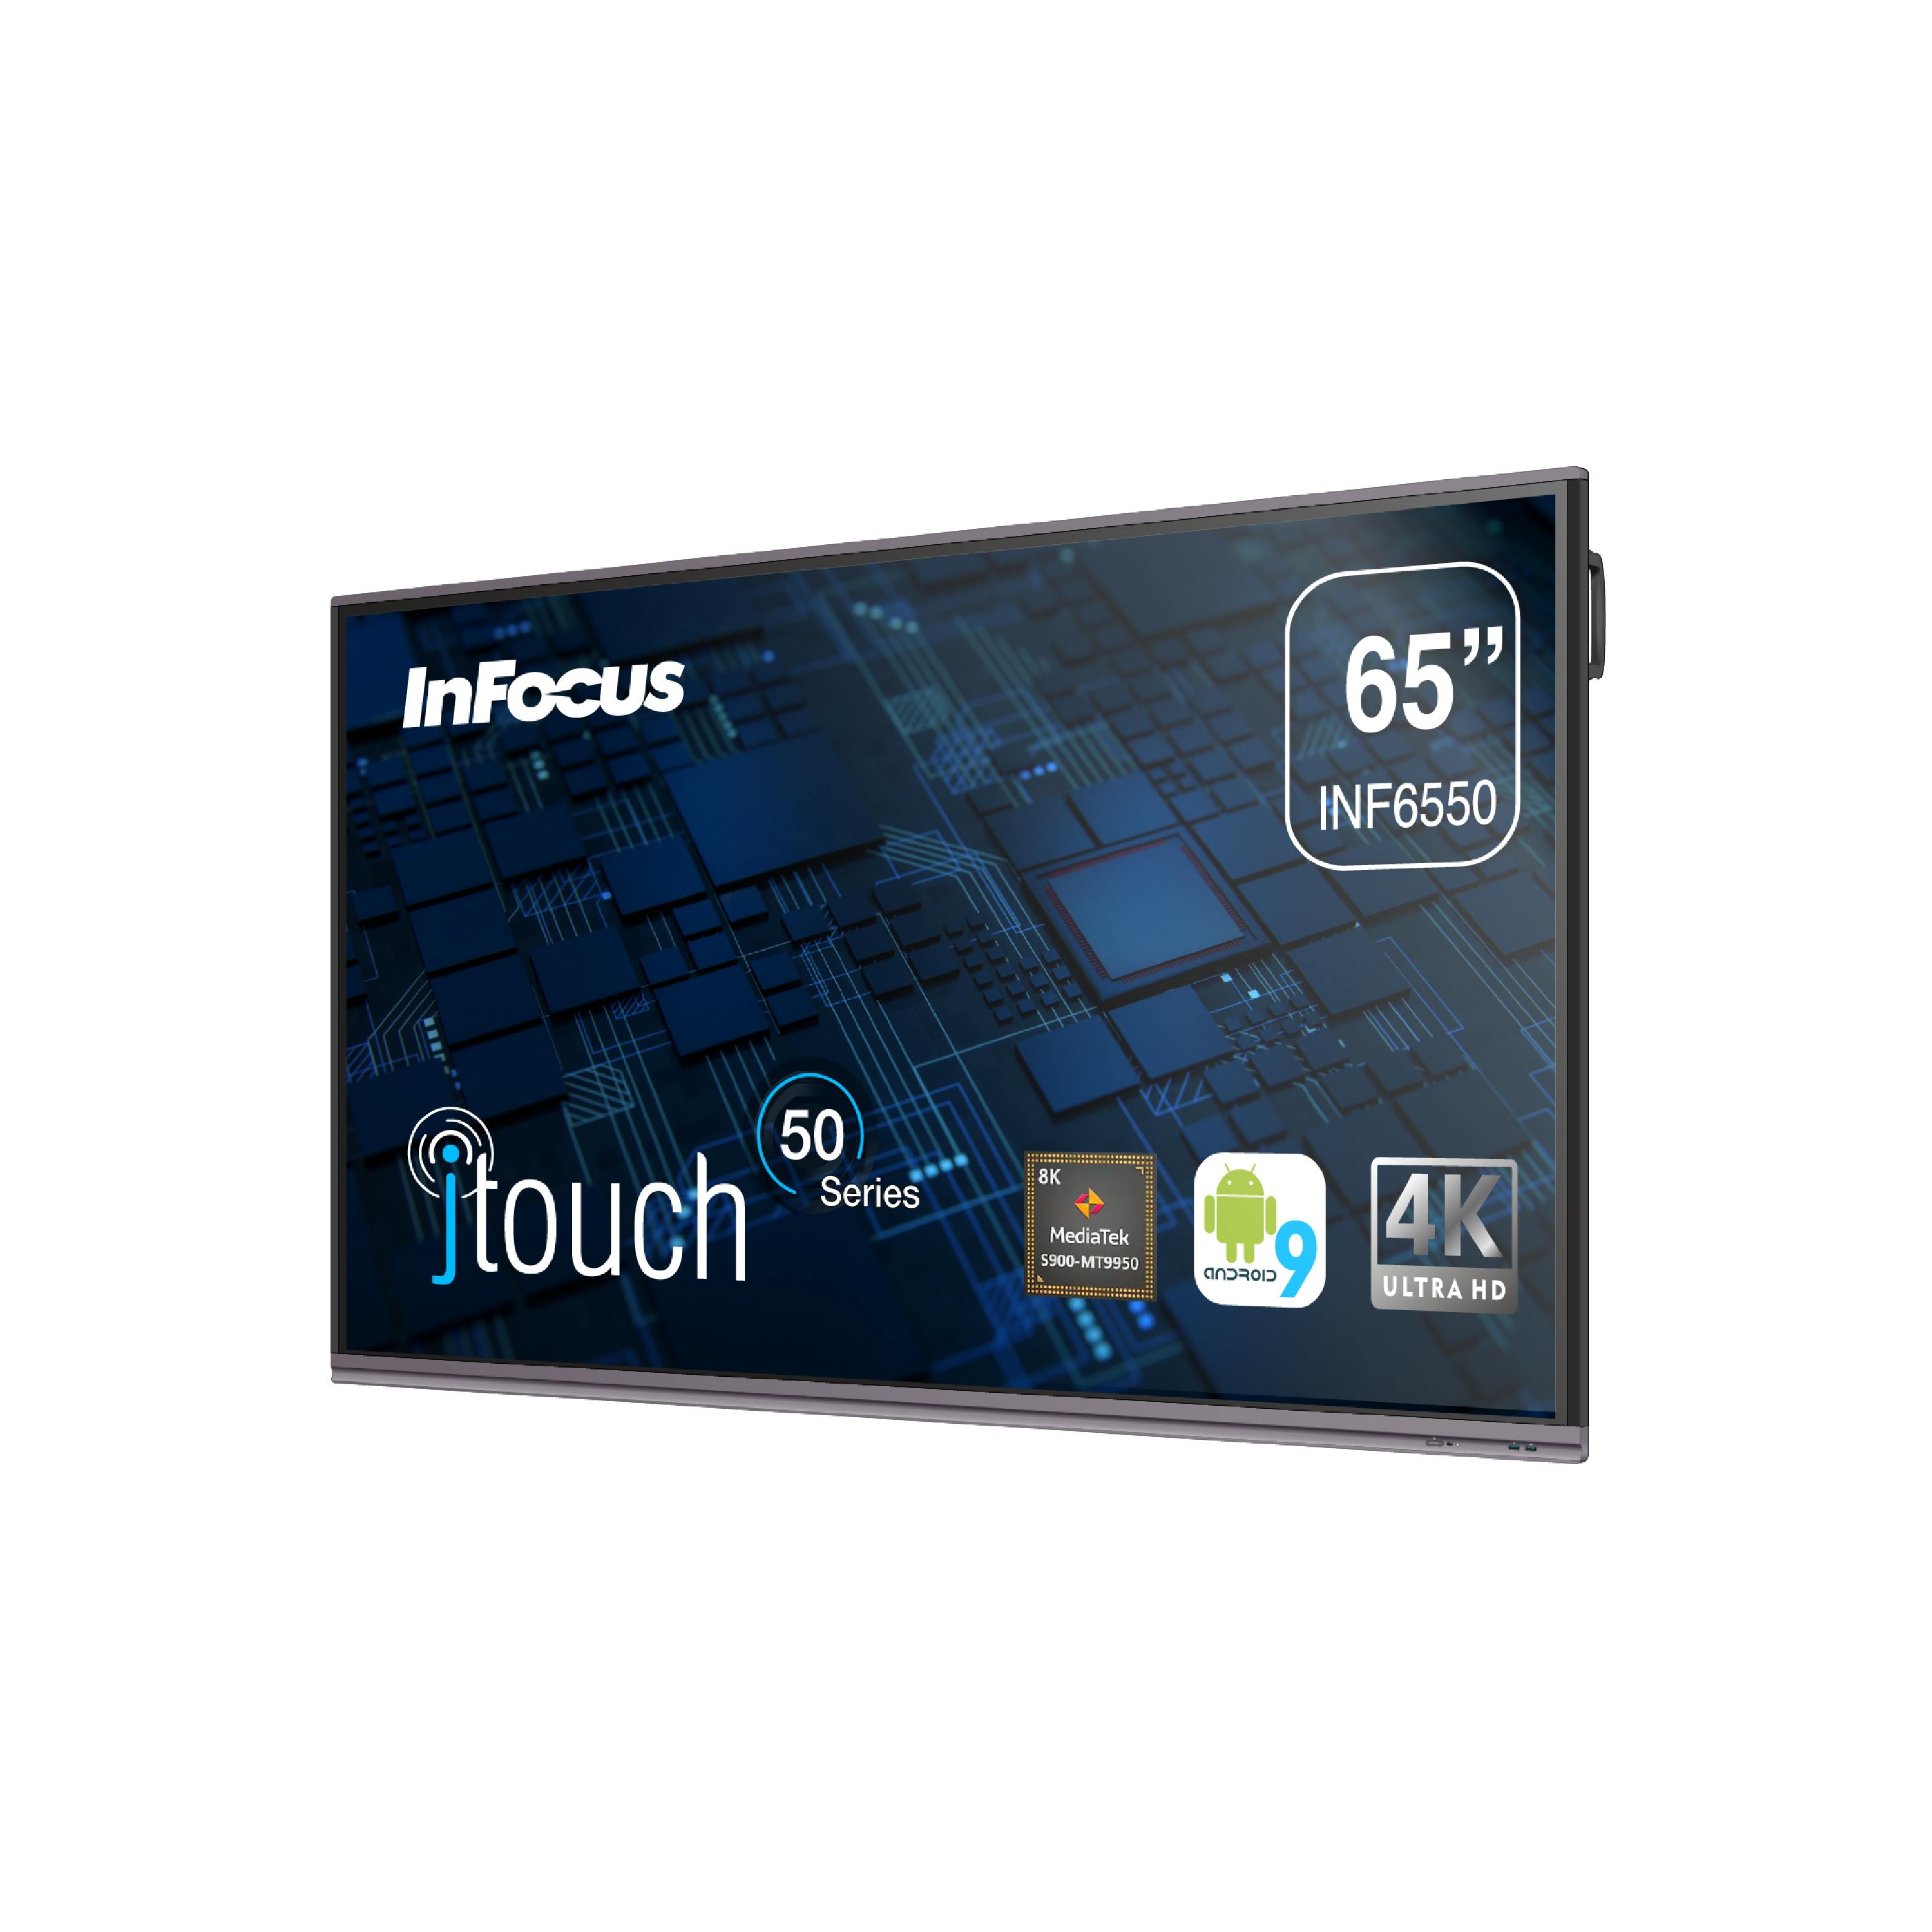 https://infocus.imgix.net/2022/04/JTouch-50-Series_INF6550_FR_90-01.png?auto=compress%2Cformat&ixlib=php-3.3.0